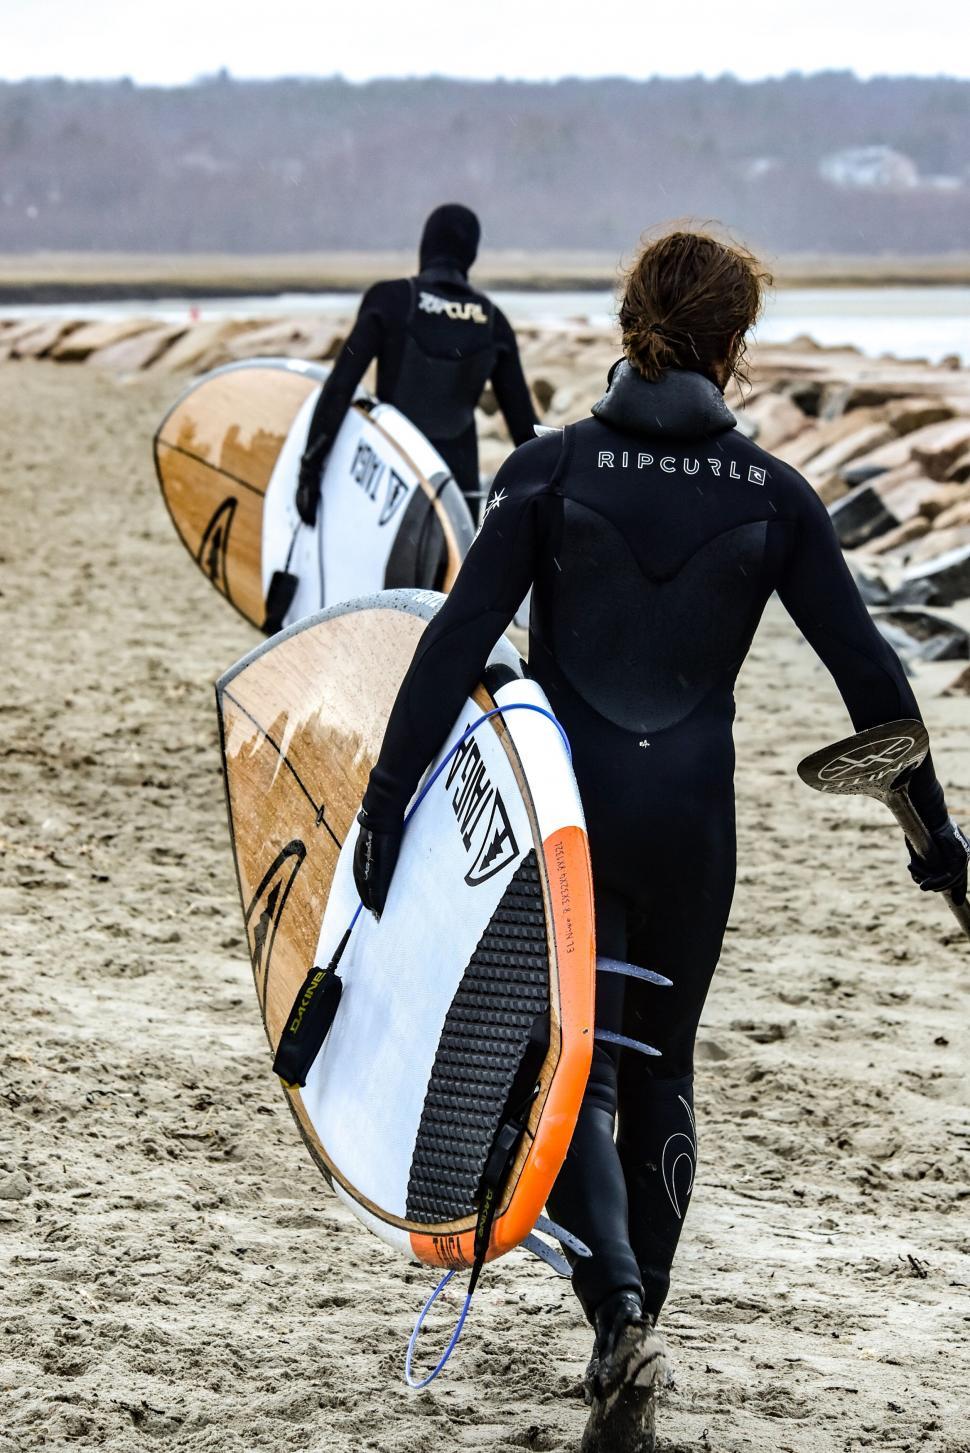 Free Image of Two Surfers Walking on the Beach Carrying Their Boards 